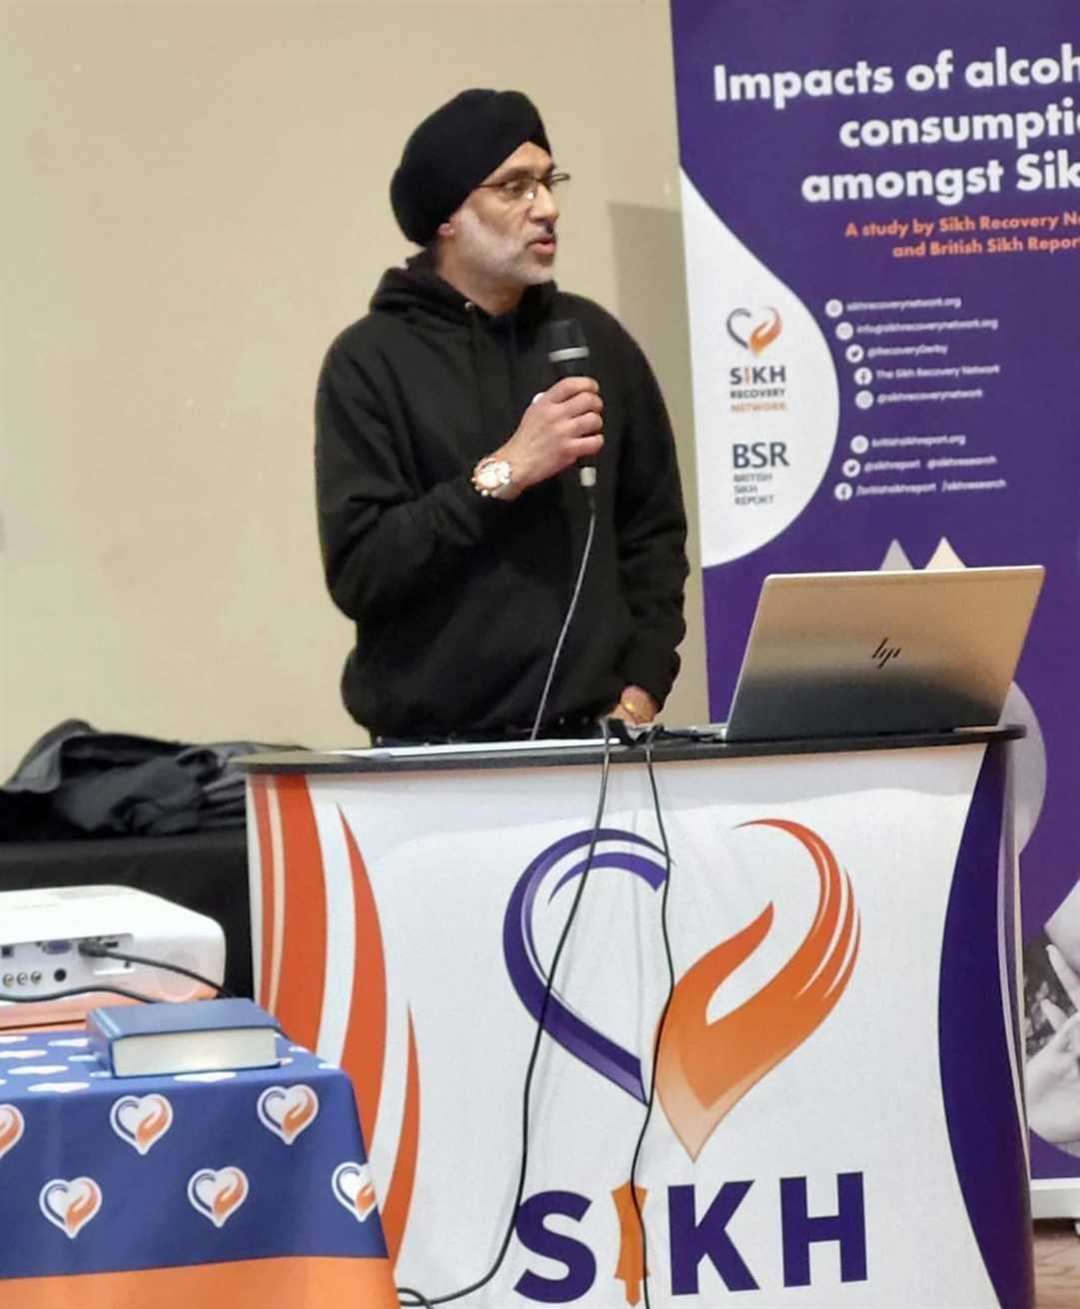 The Sikh Recovery Network provides help and support to addicts